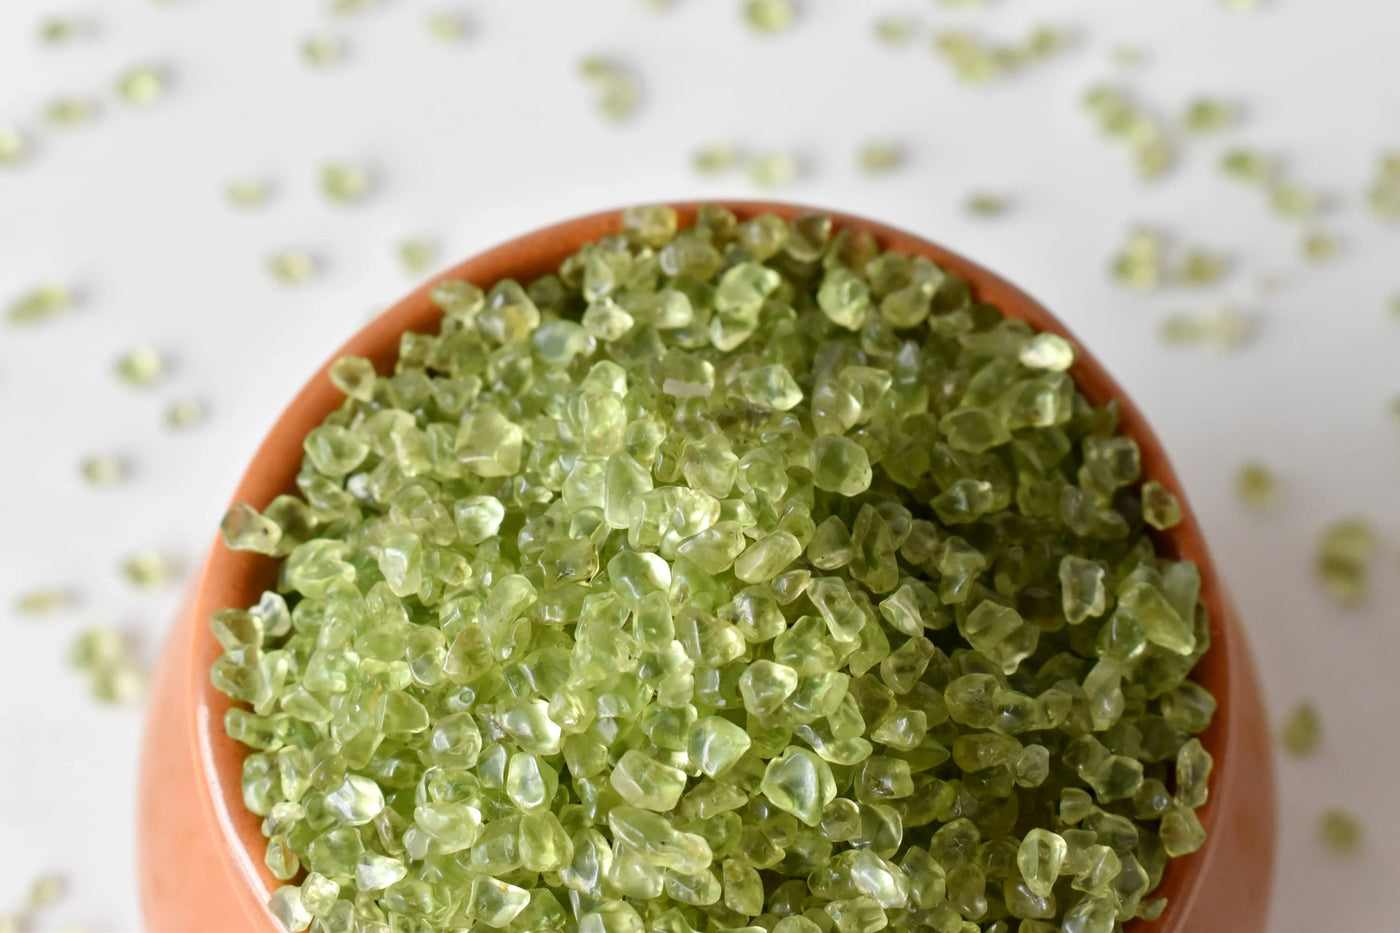 Peridot Gemstone Chips (Protection Against Difficulties and Negativity)